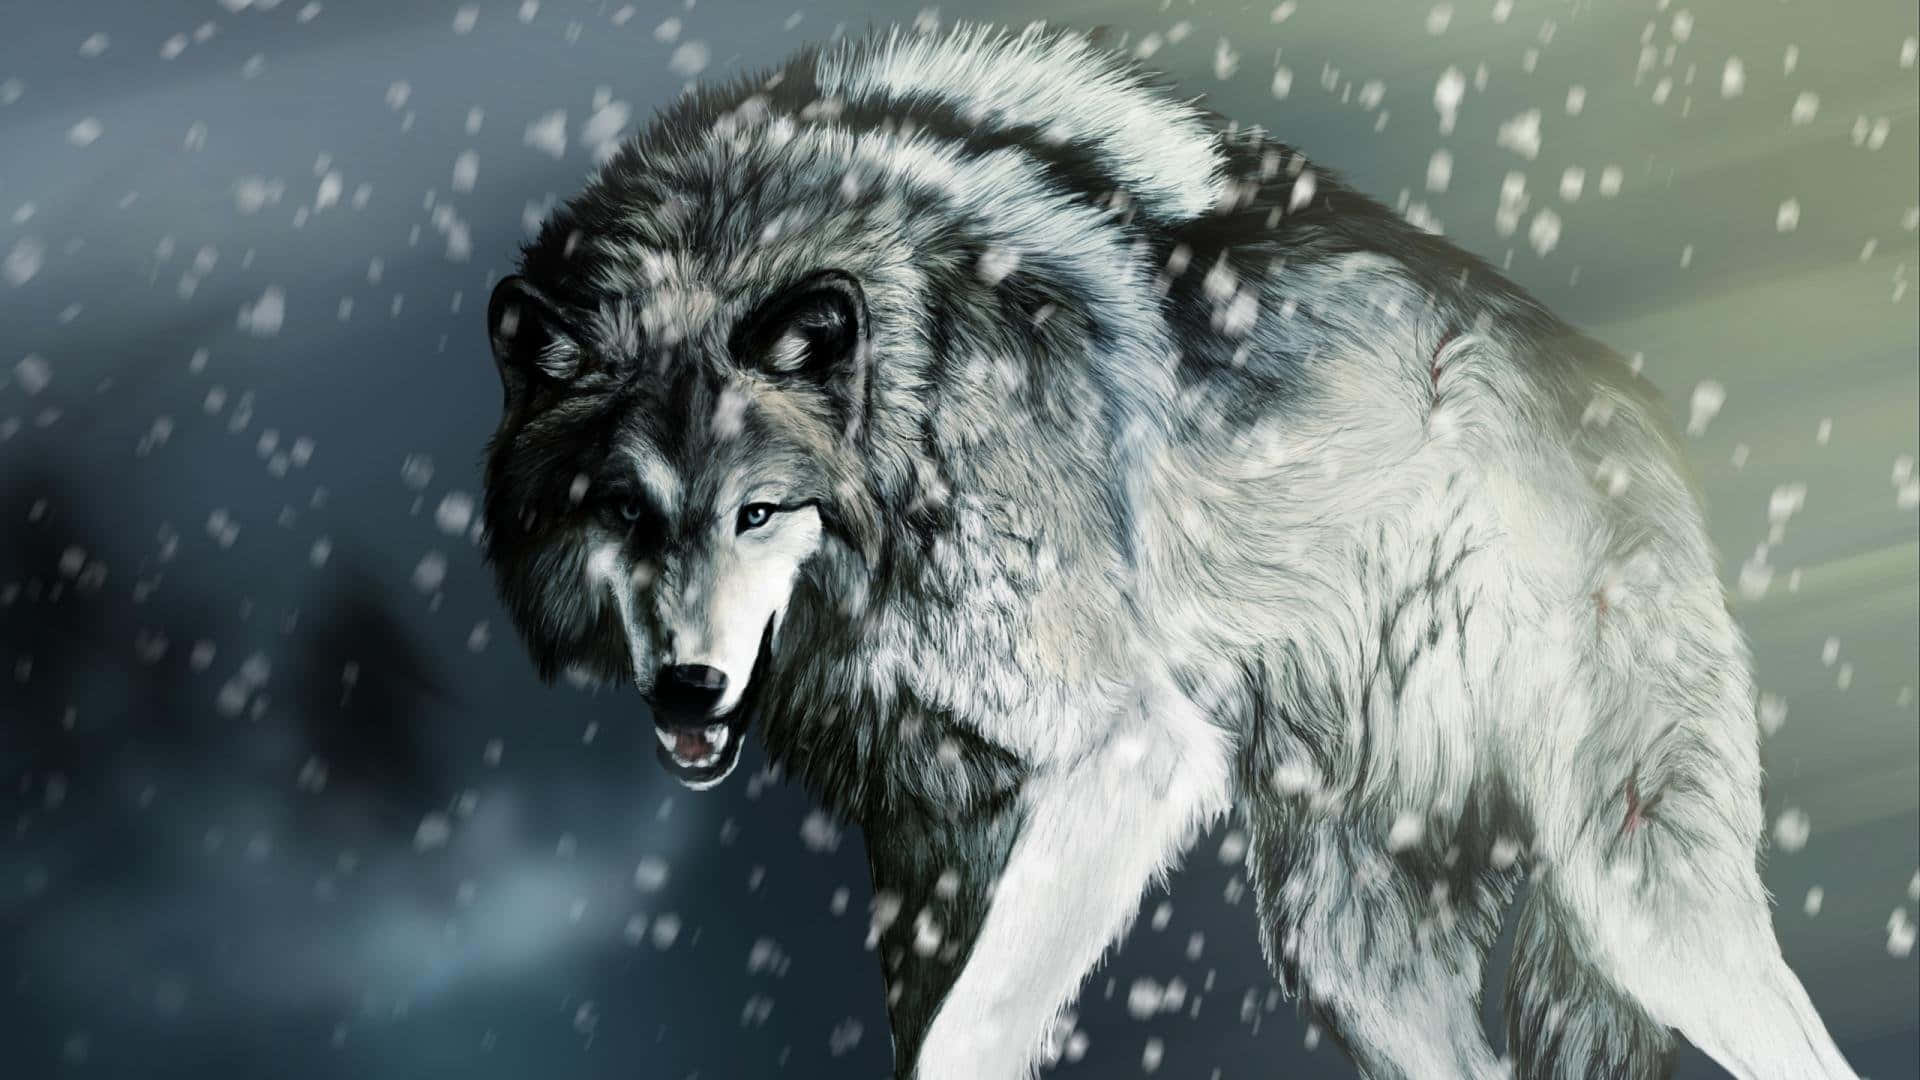 The Majestic Lone Wolf in a Mystical Forest Wallpaper